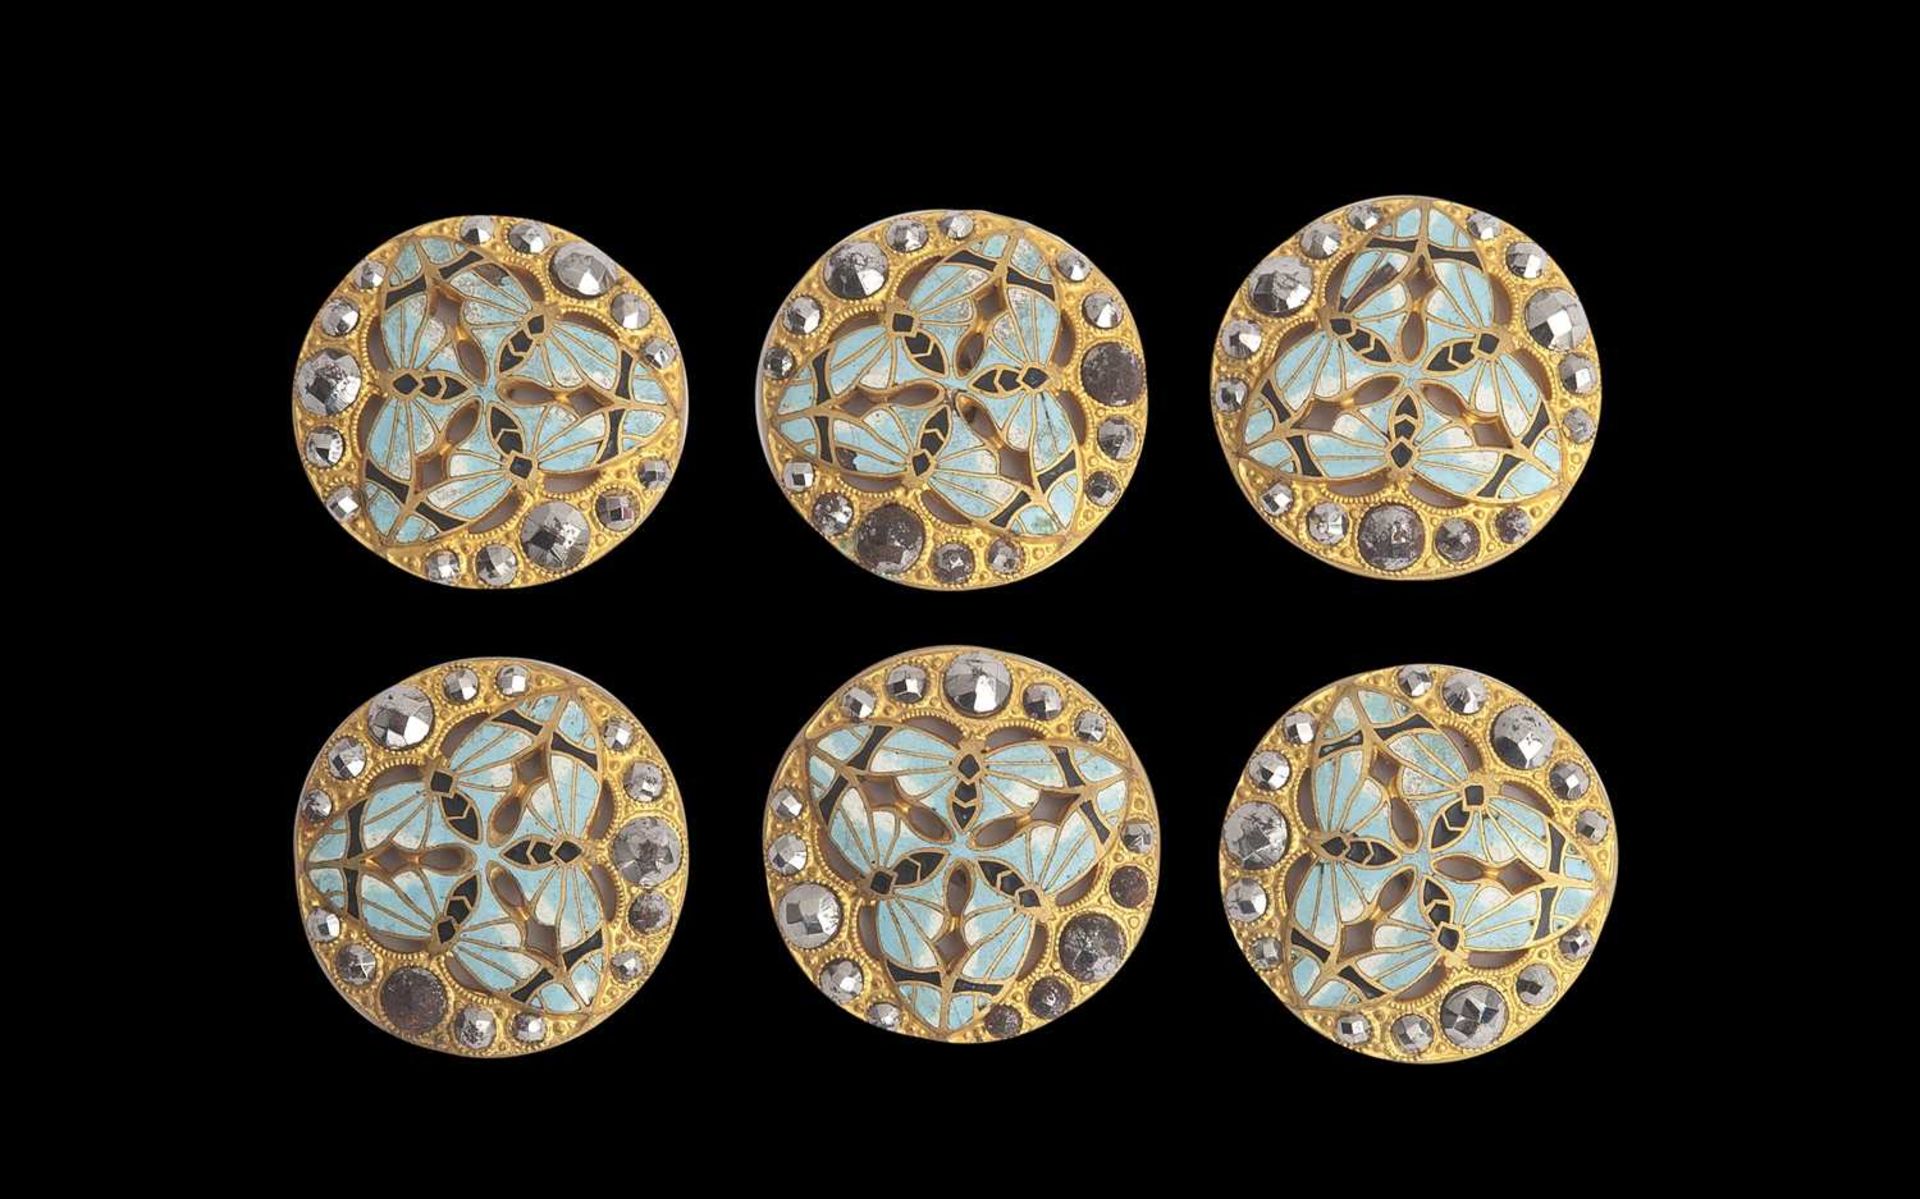 A SET OF SIX EARLY 20TH CENTURY GILT METAL, ENAMEL AND MARCASITE BUTTONS